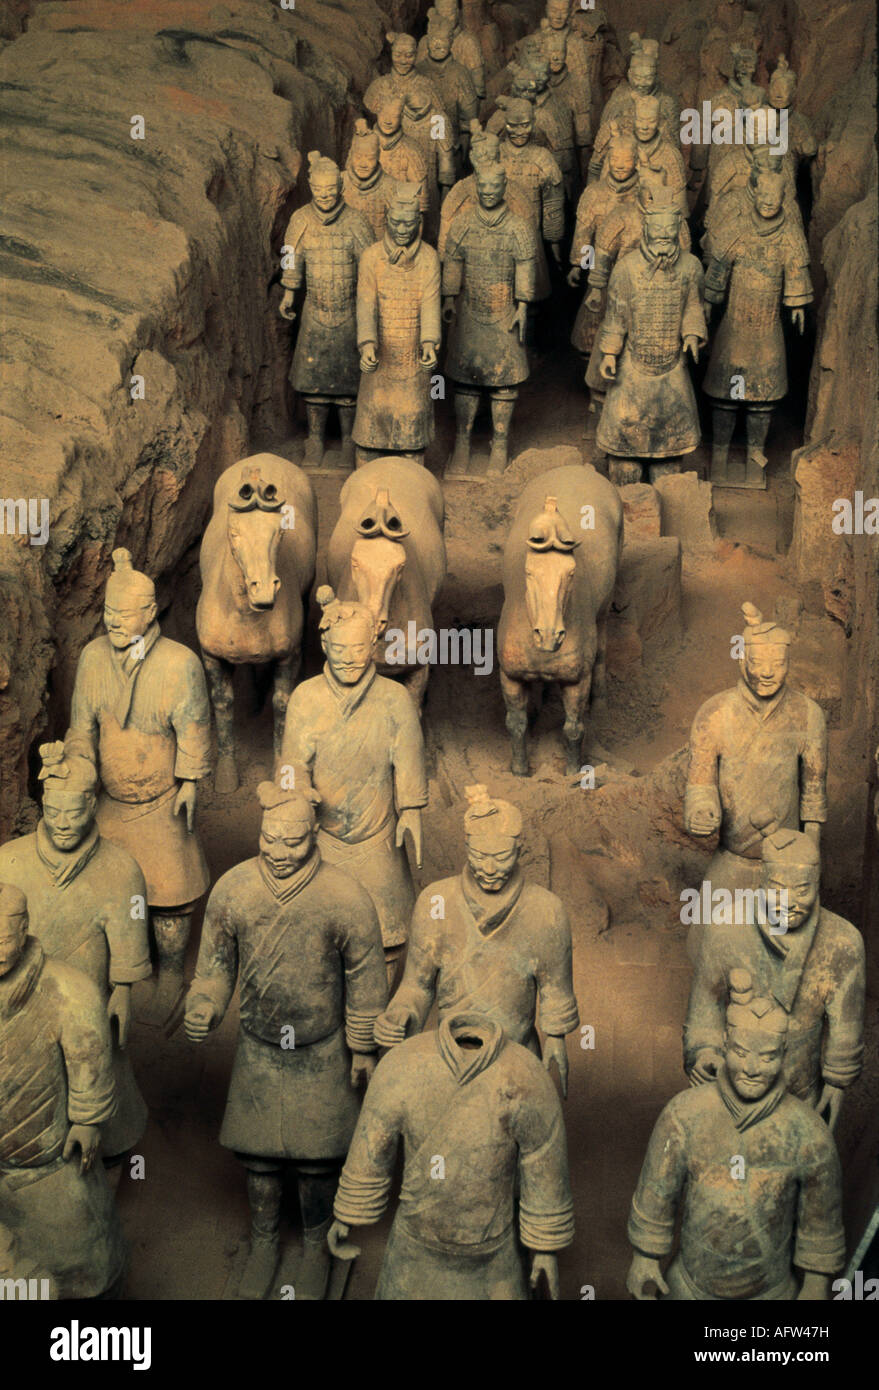 Terra-cotta Warriors and Horses of Emperor Qin Shihuang in Xi'an Shaanxi Province of China Stock Photo